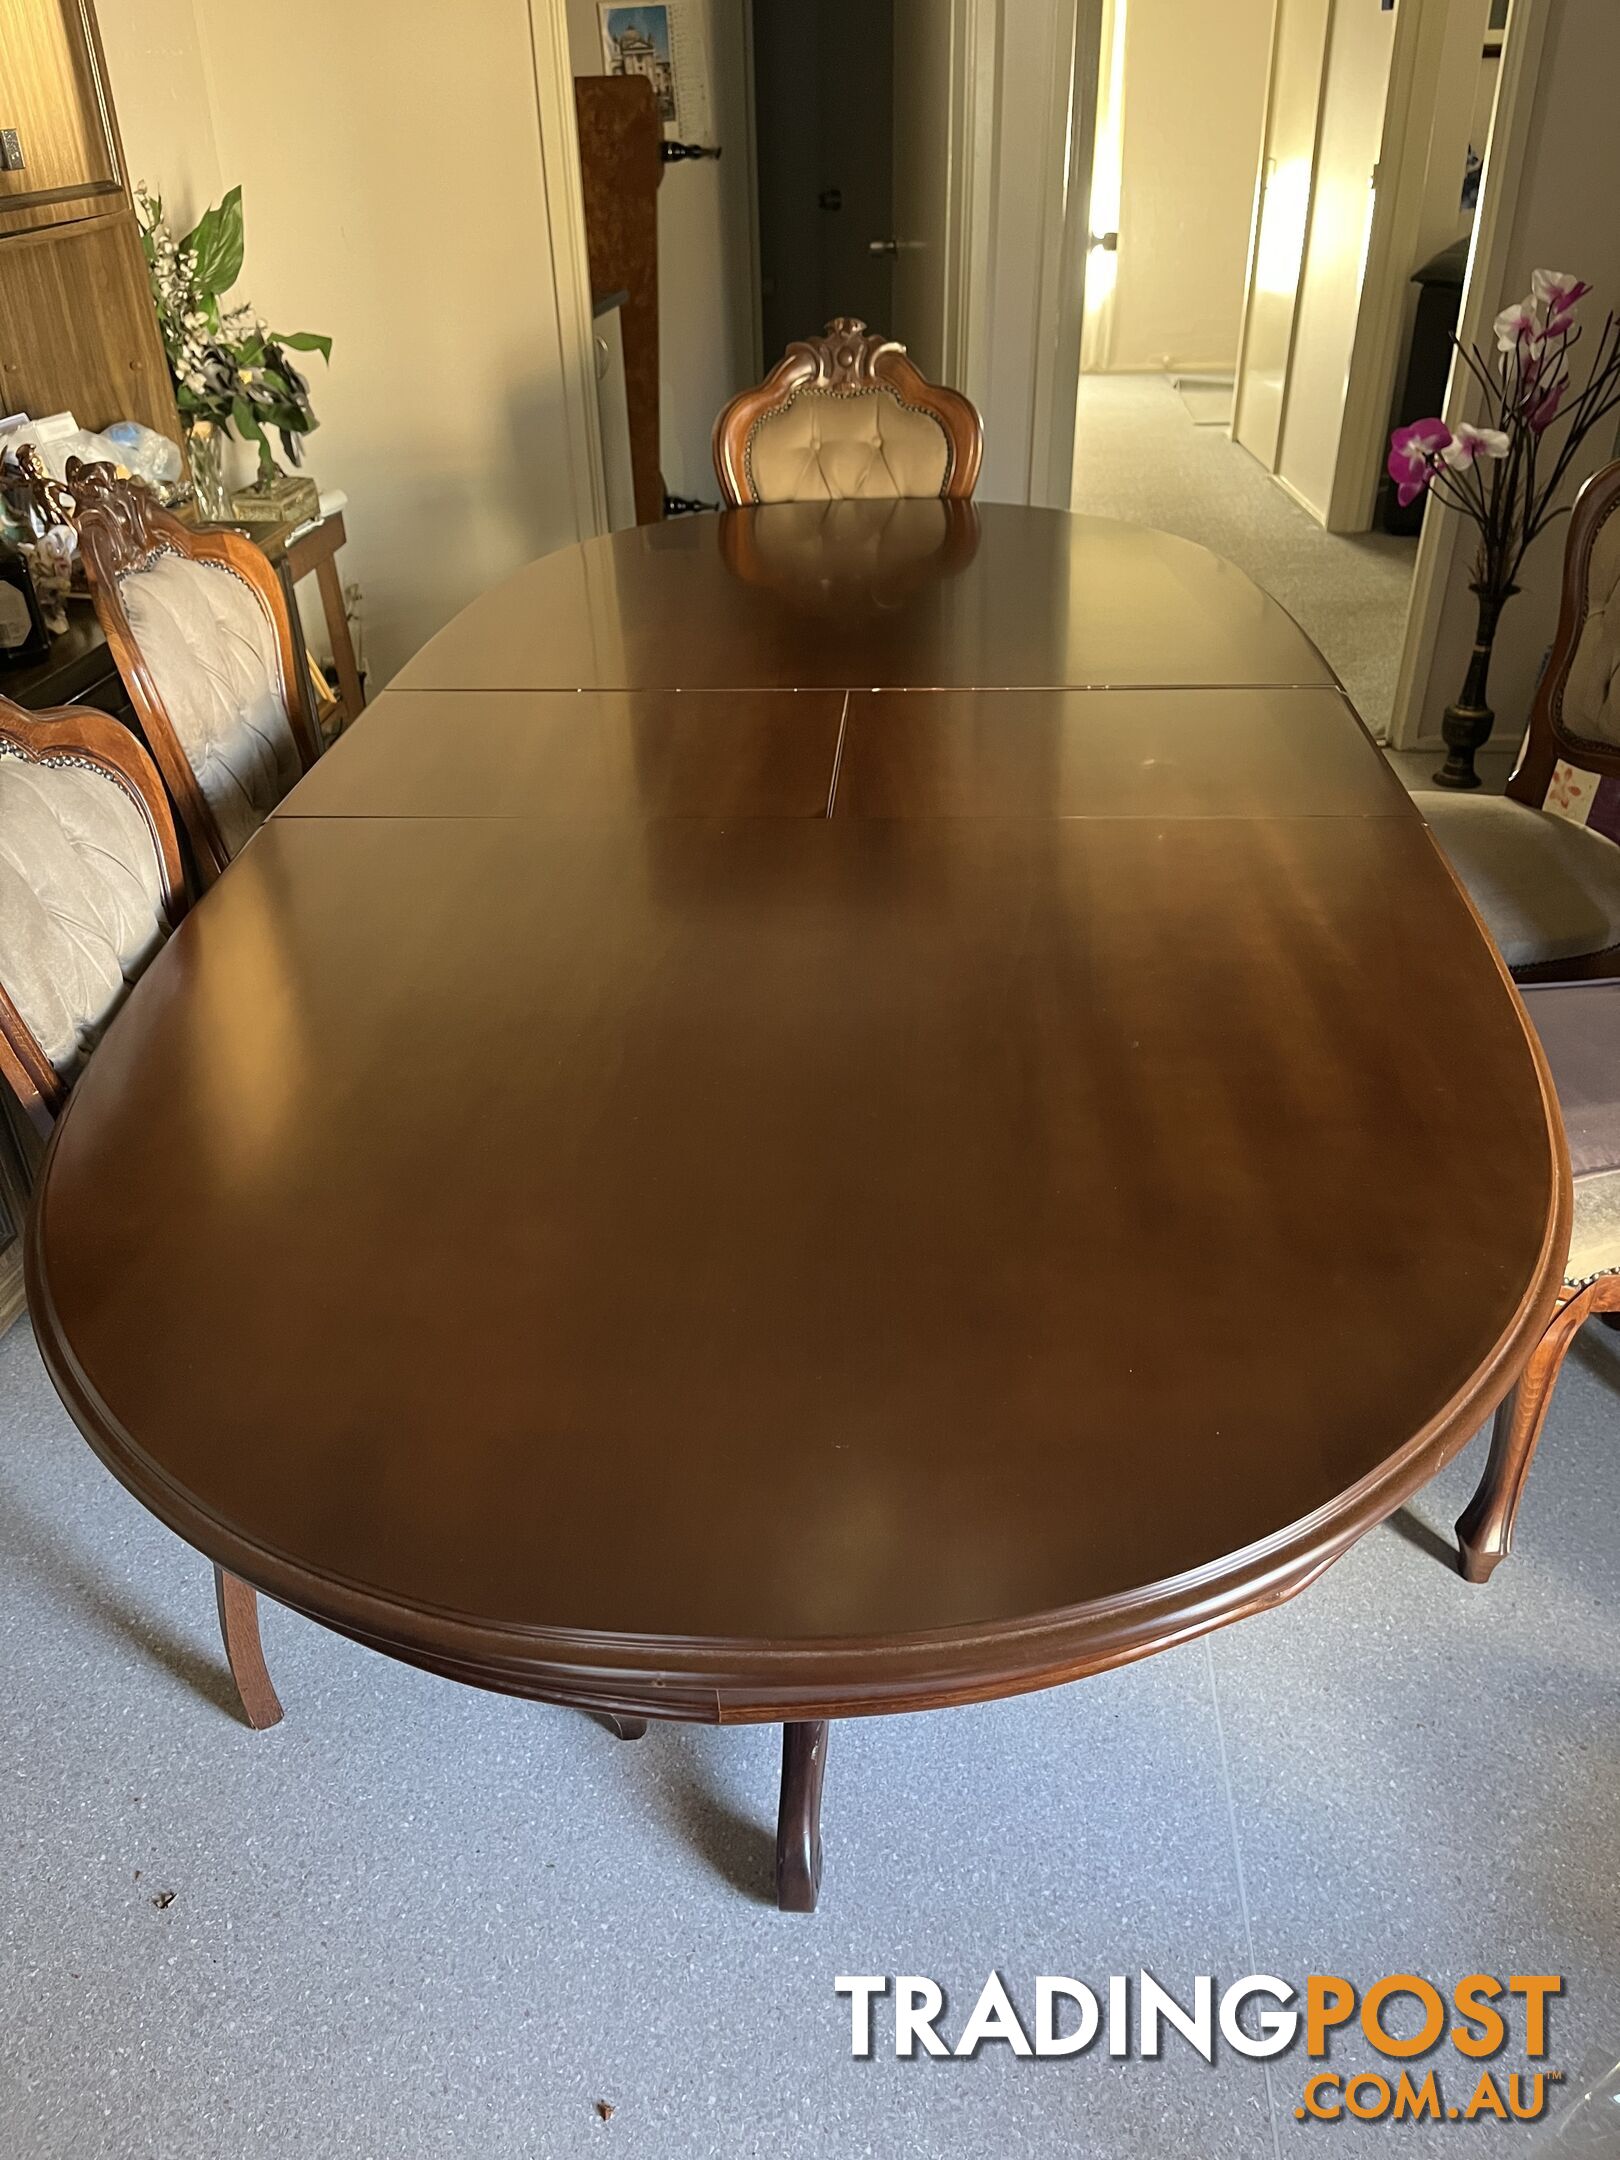 Various household furniture for sale